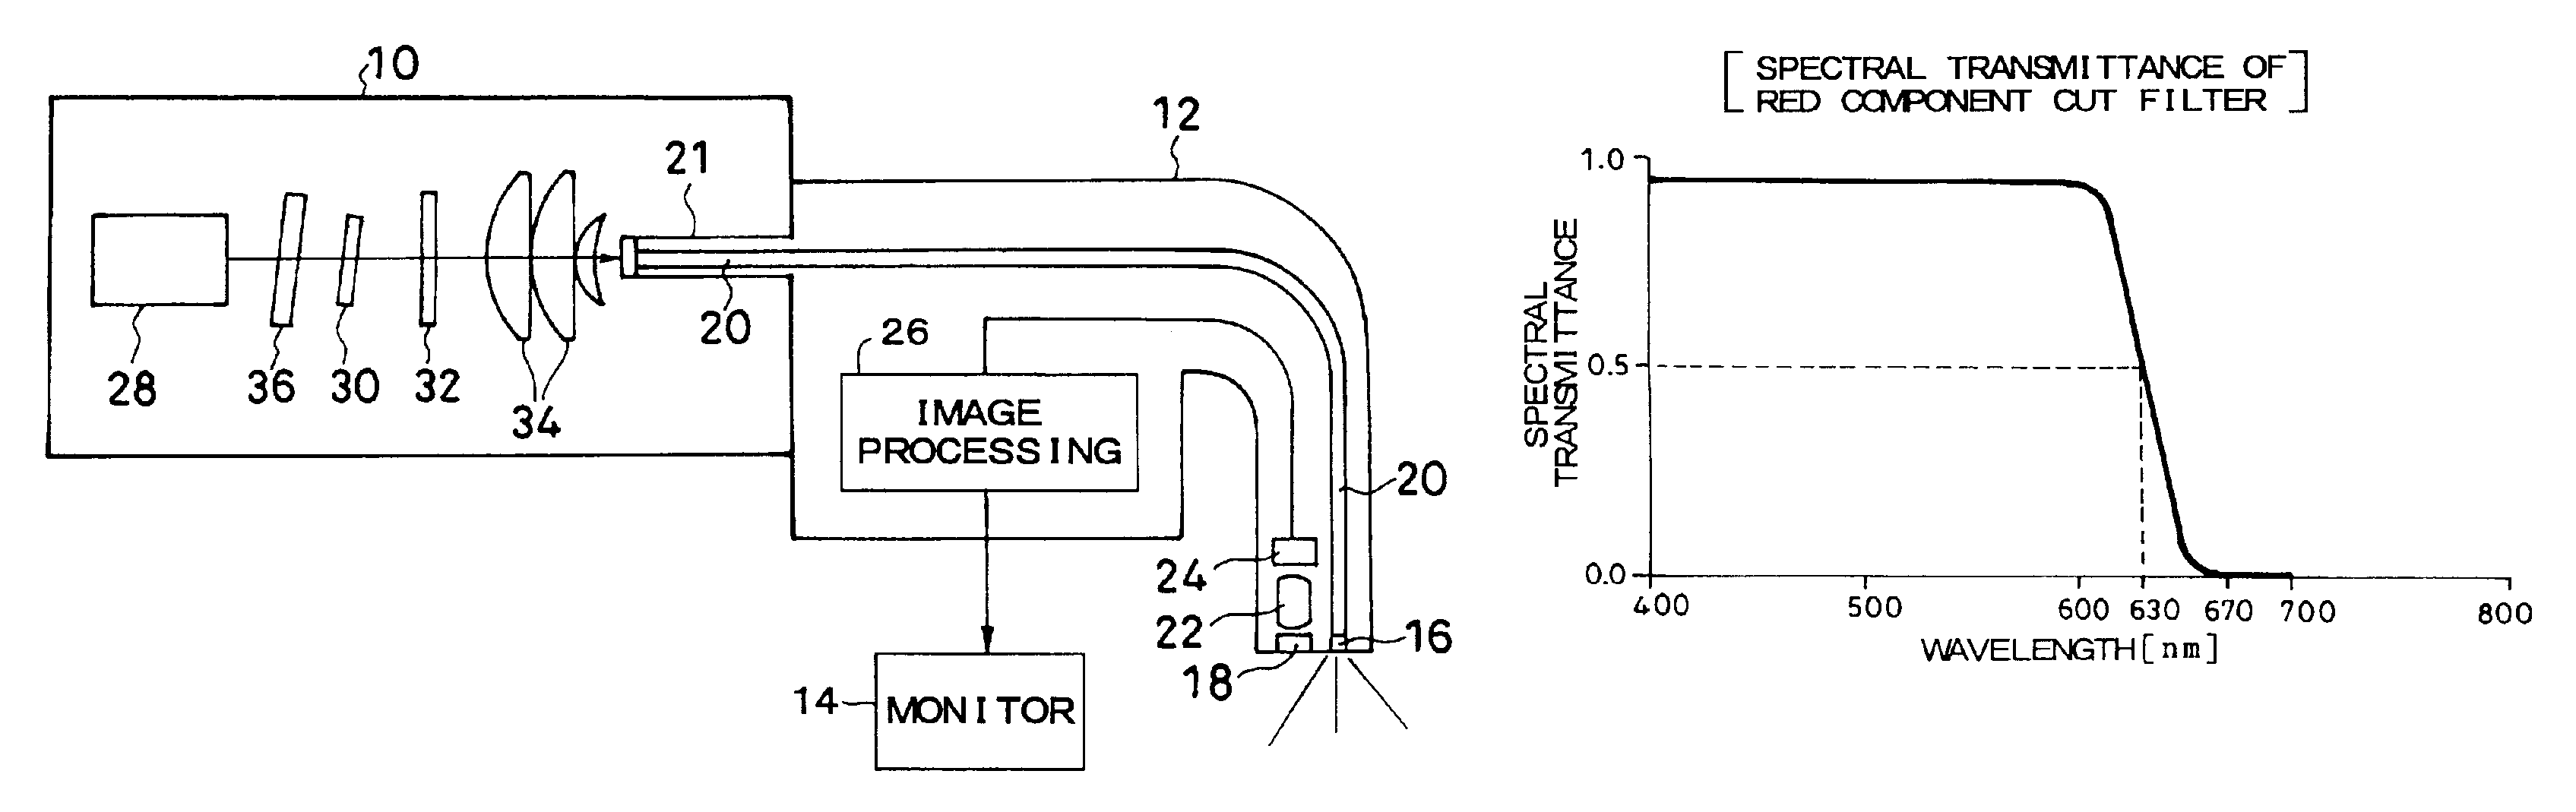 Endoscope having red component cut filter